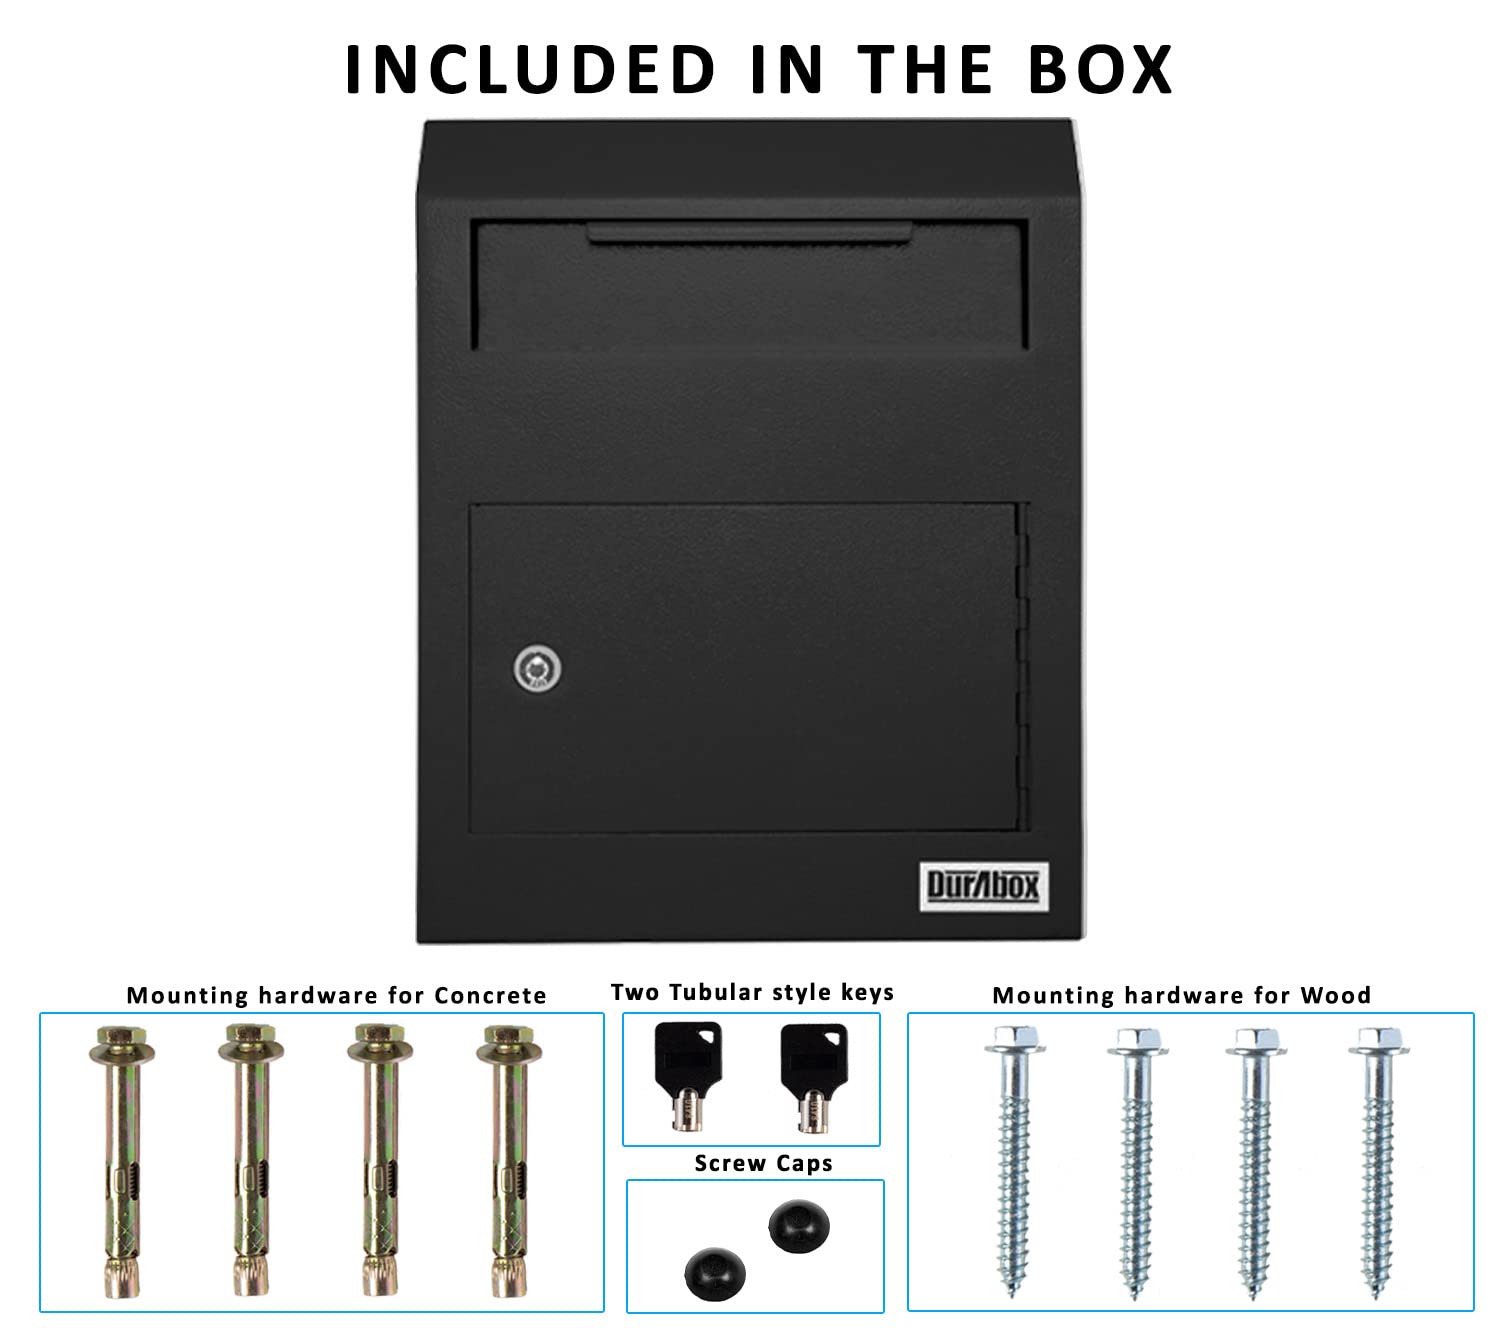 DuraBox Wall Mount Locking Drop Box, Heavy Duty Steel Mailbox for Rent Payments, Mail, Keys, Cash, Checks - Safe Storage Dropbox for After Hours Deposits W500 (Black)